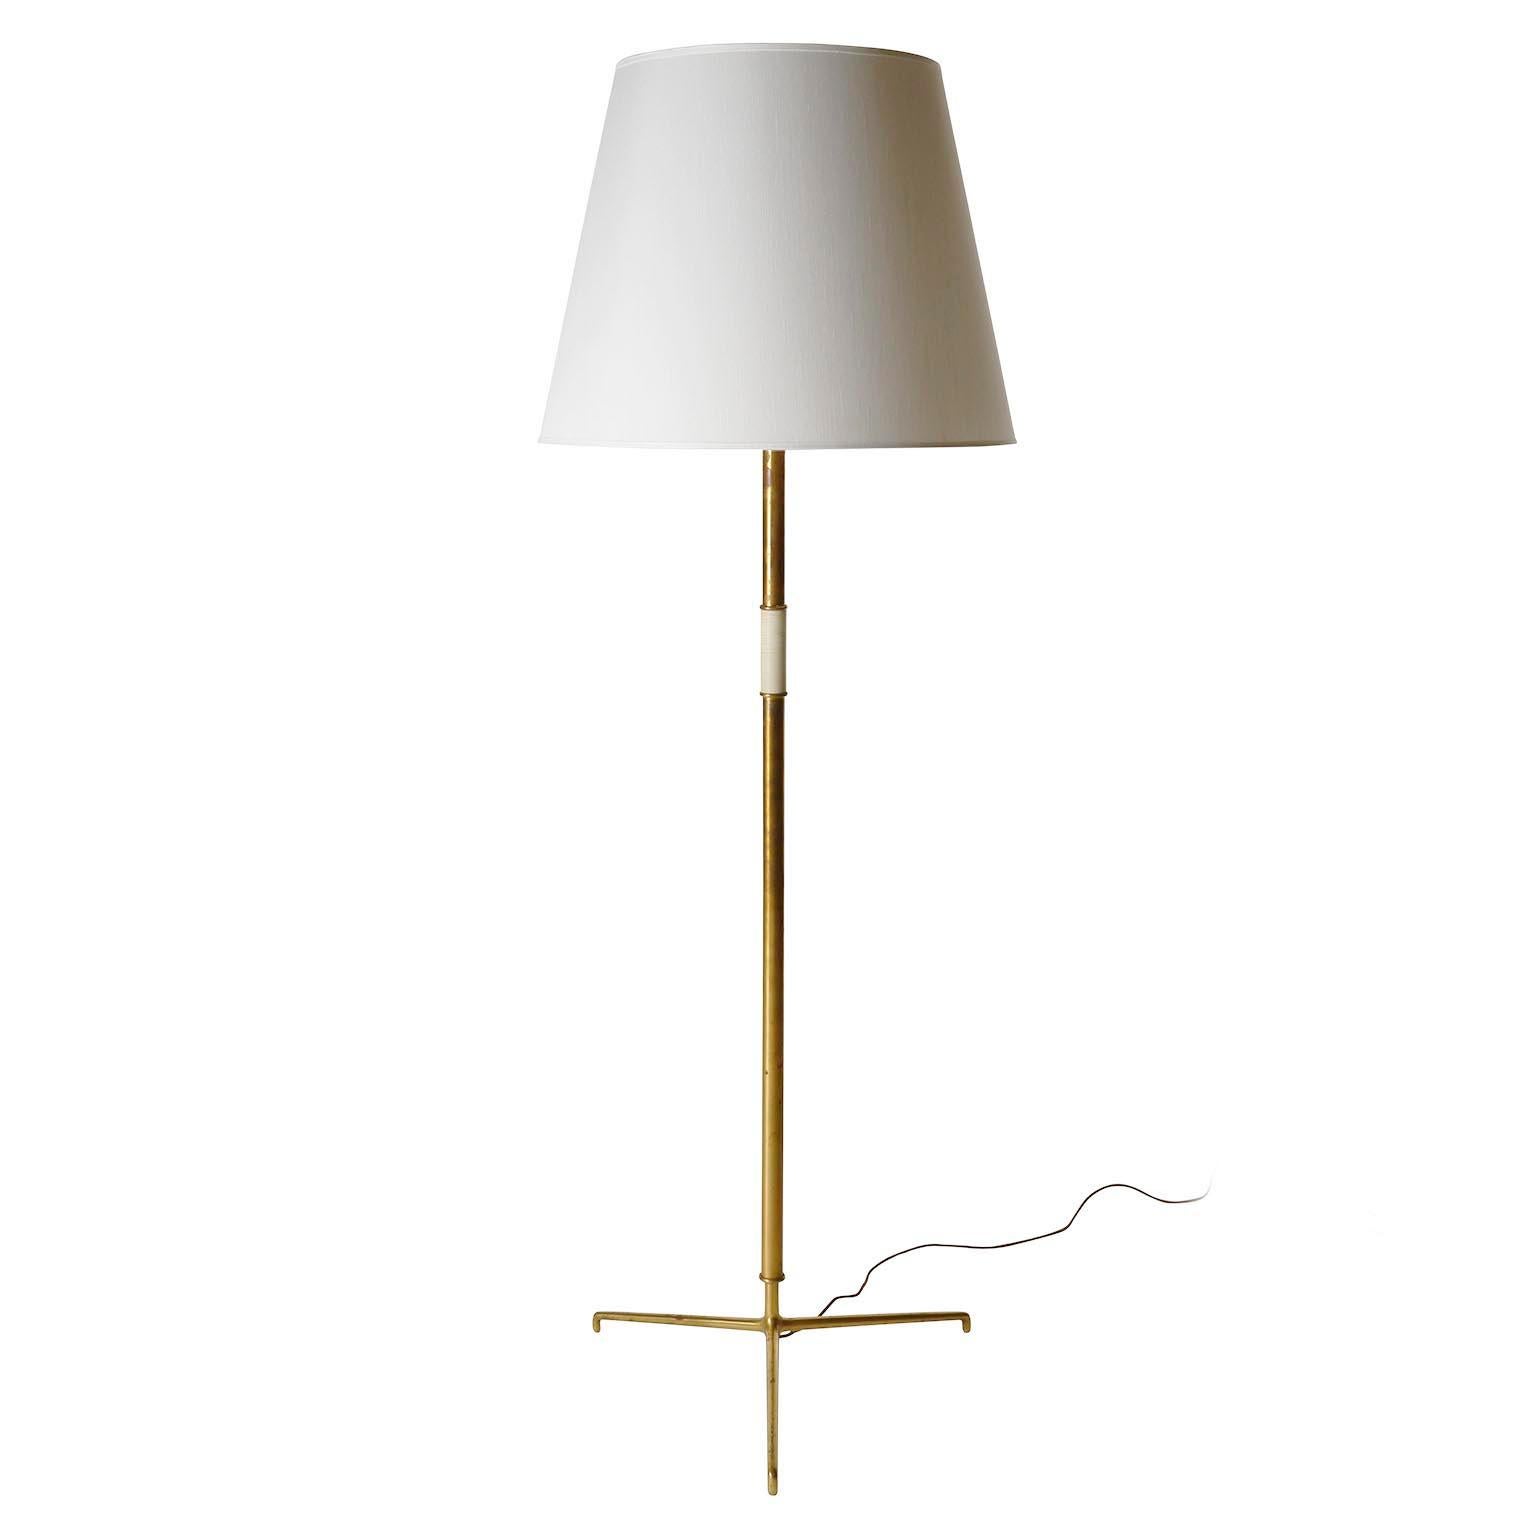 A pair of large brass floor lamps model 'Helios' no. 2035 manufactured by J.T. Kalmar in Mid-Century, circa 1960. 
The lamp is documented in the Kalmar catalogue from the 1950s as well as in the catalogue from the 1960s. It was the most expensive